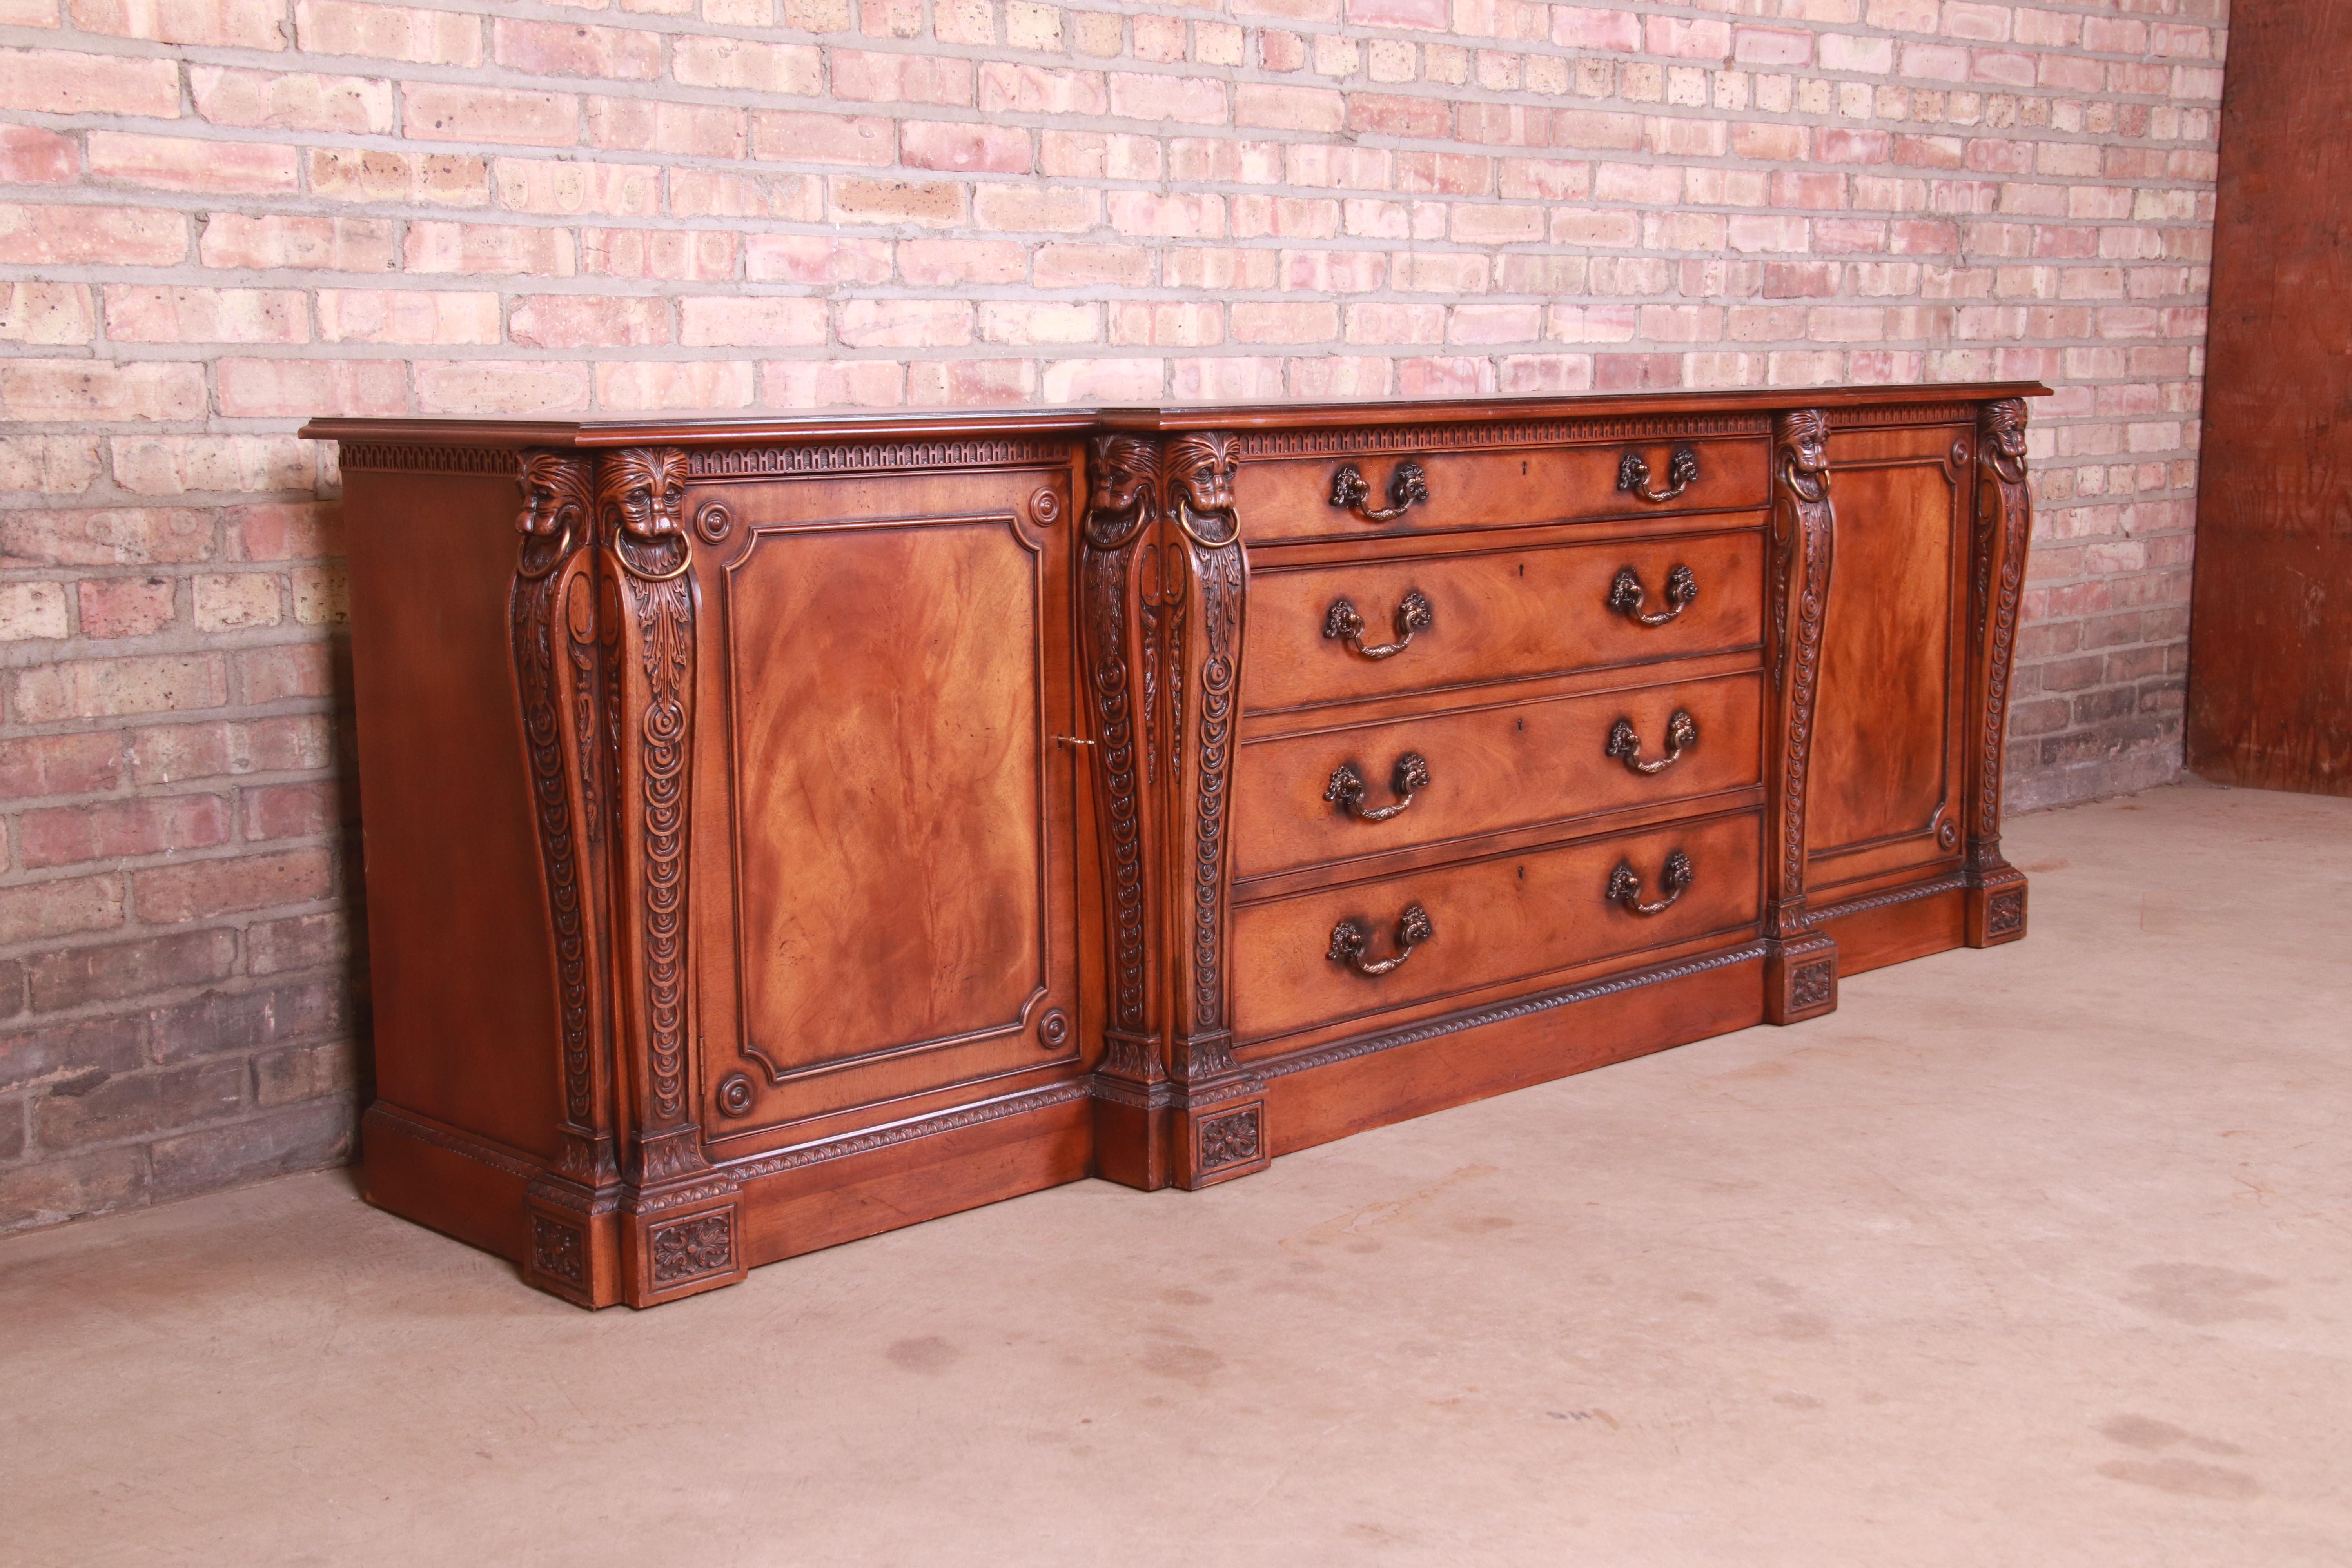 Brass Baker Furniture Neoclassical Ornately Carved Mahogany Sideboard Credenza